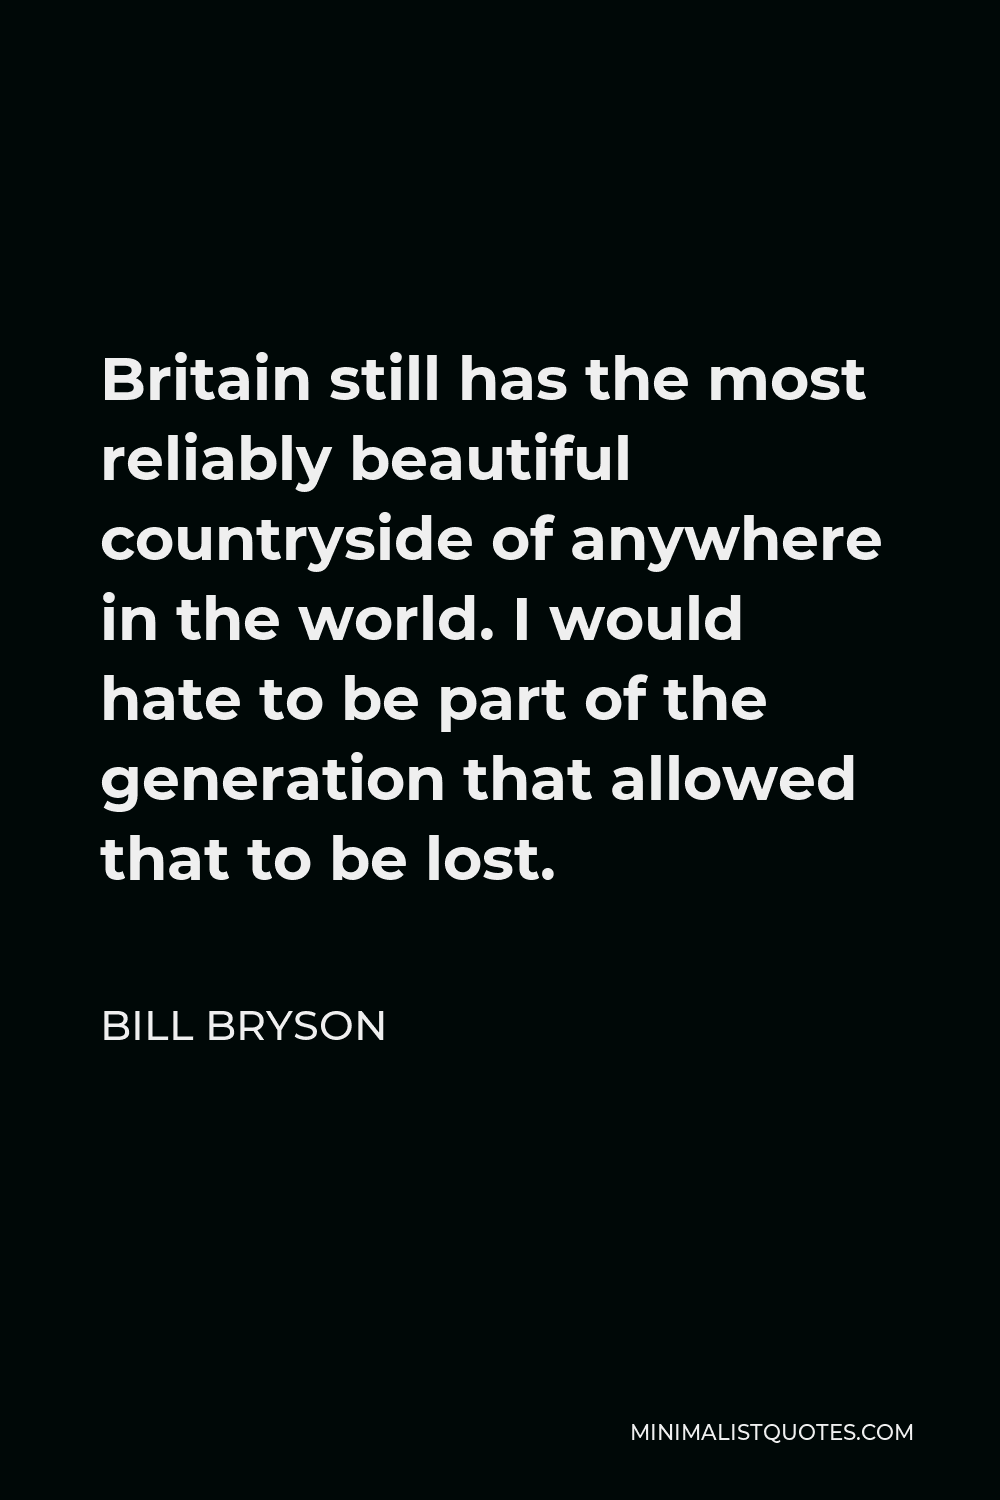 Bill Bryson Quote - Britain still has the most reliably beautiful countryside of anywhere in the world. I would hate to be part of the generation that allowed that to be lost.